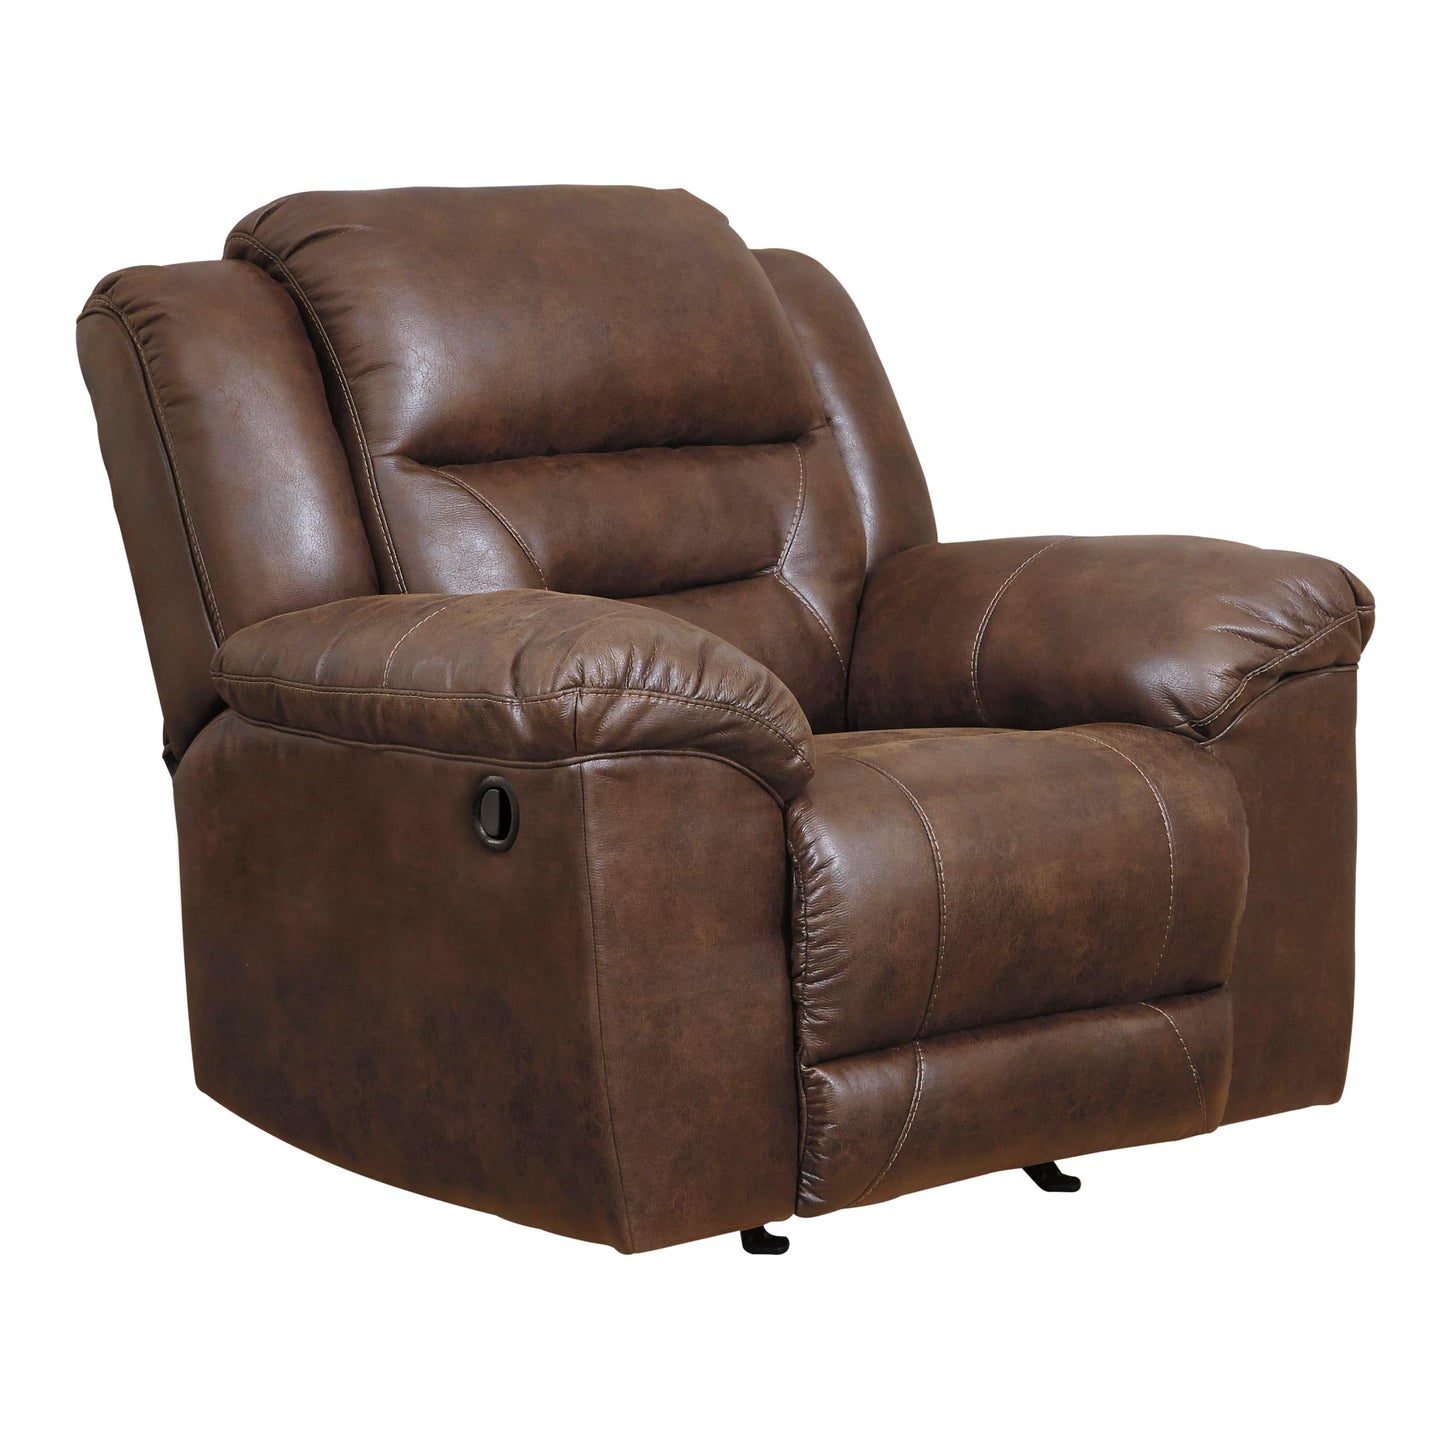 Signature Design by Ashley Stoneland Rocker Leather Look Recliner 3990425